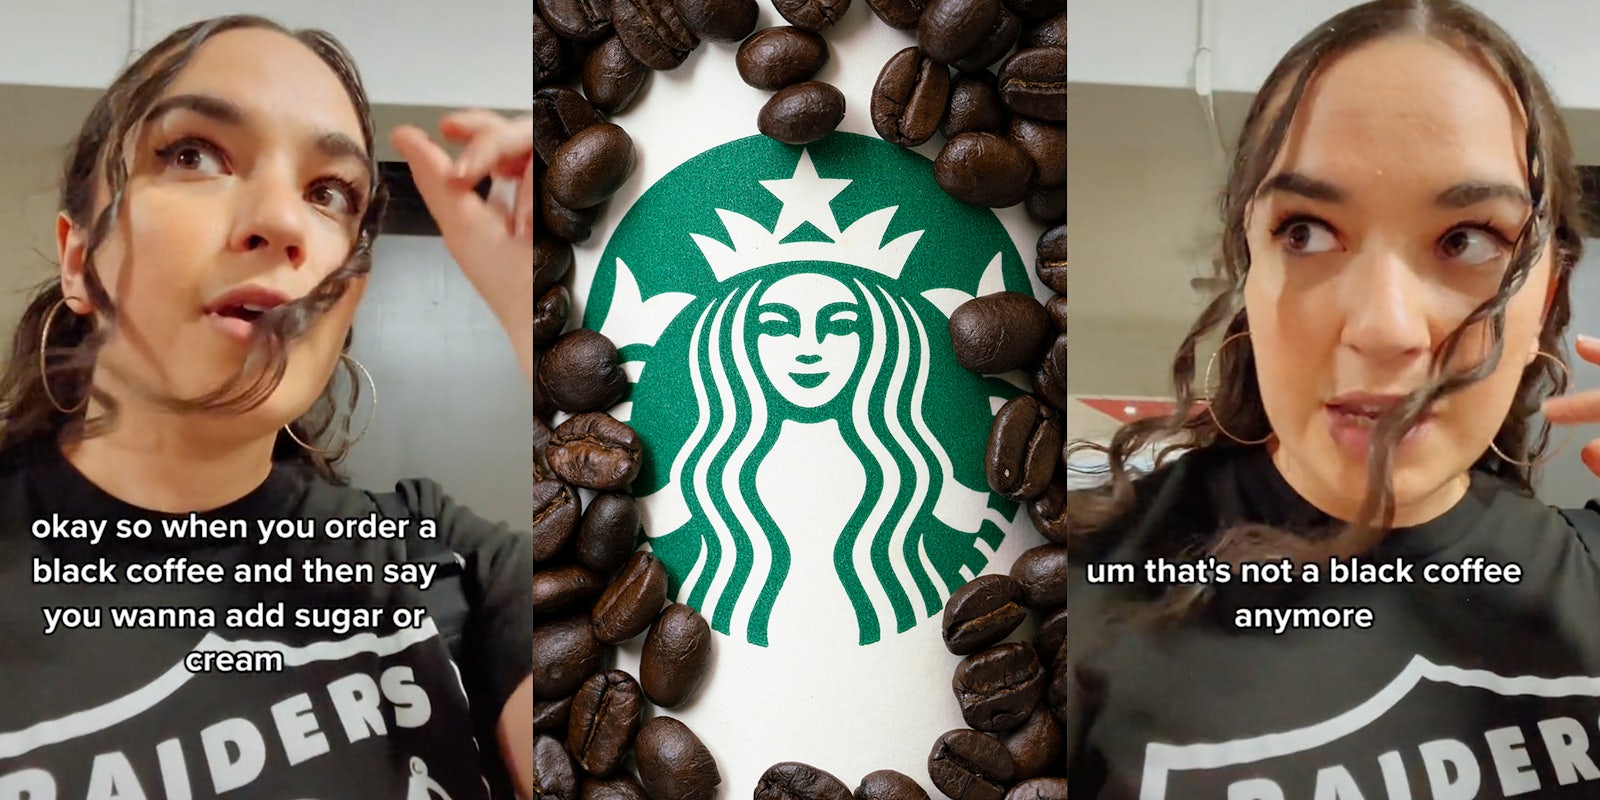 young woman with caption 'okay so when you order a black coffee and then say you wanna add sugar or cream' (l) starbucks logo and coffee beans (c) young woman with caption 'um that's not a black coffee anymore' (r)